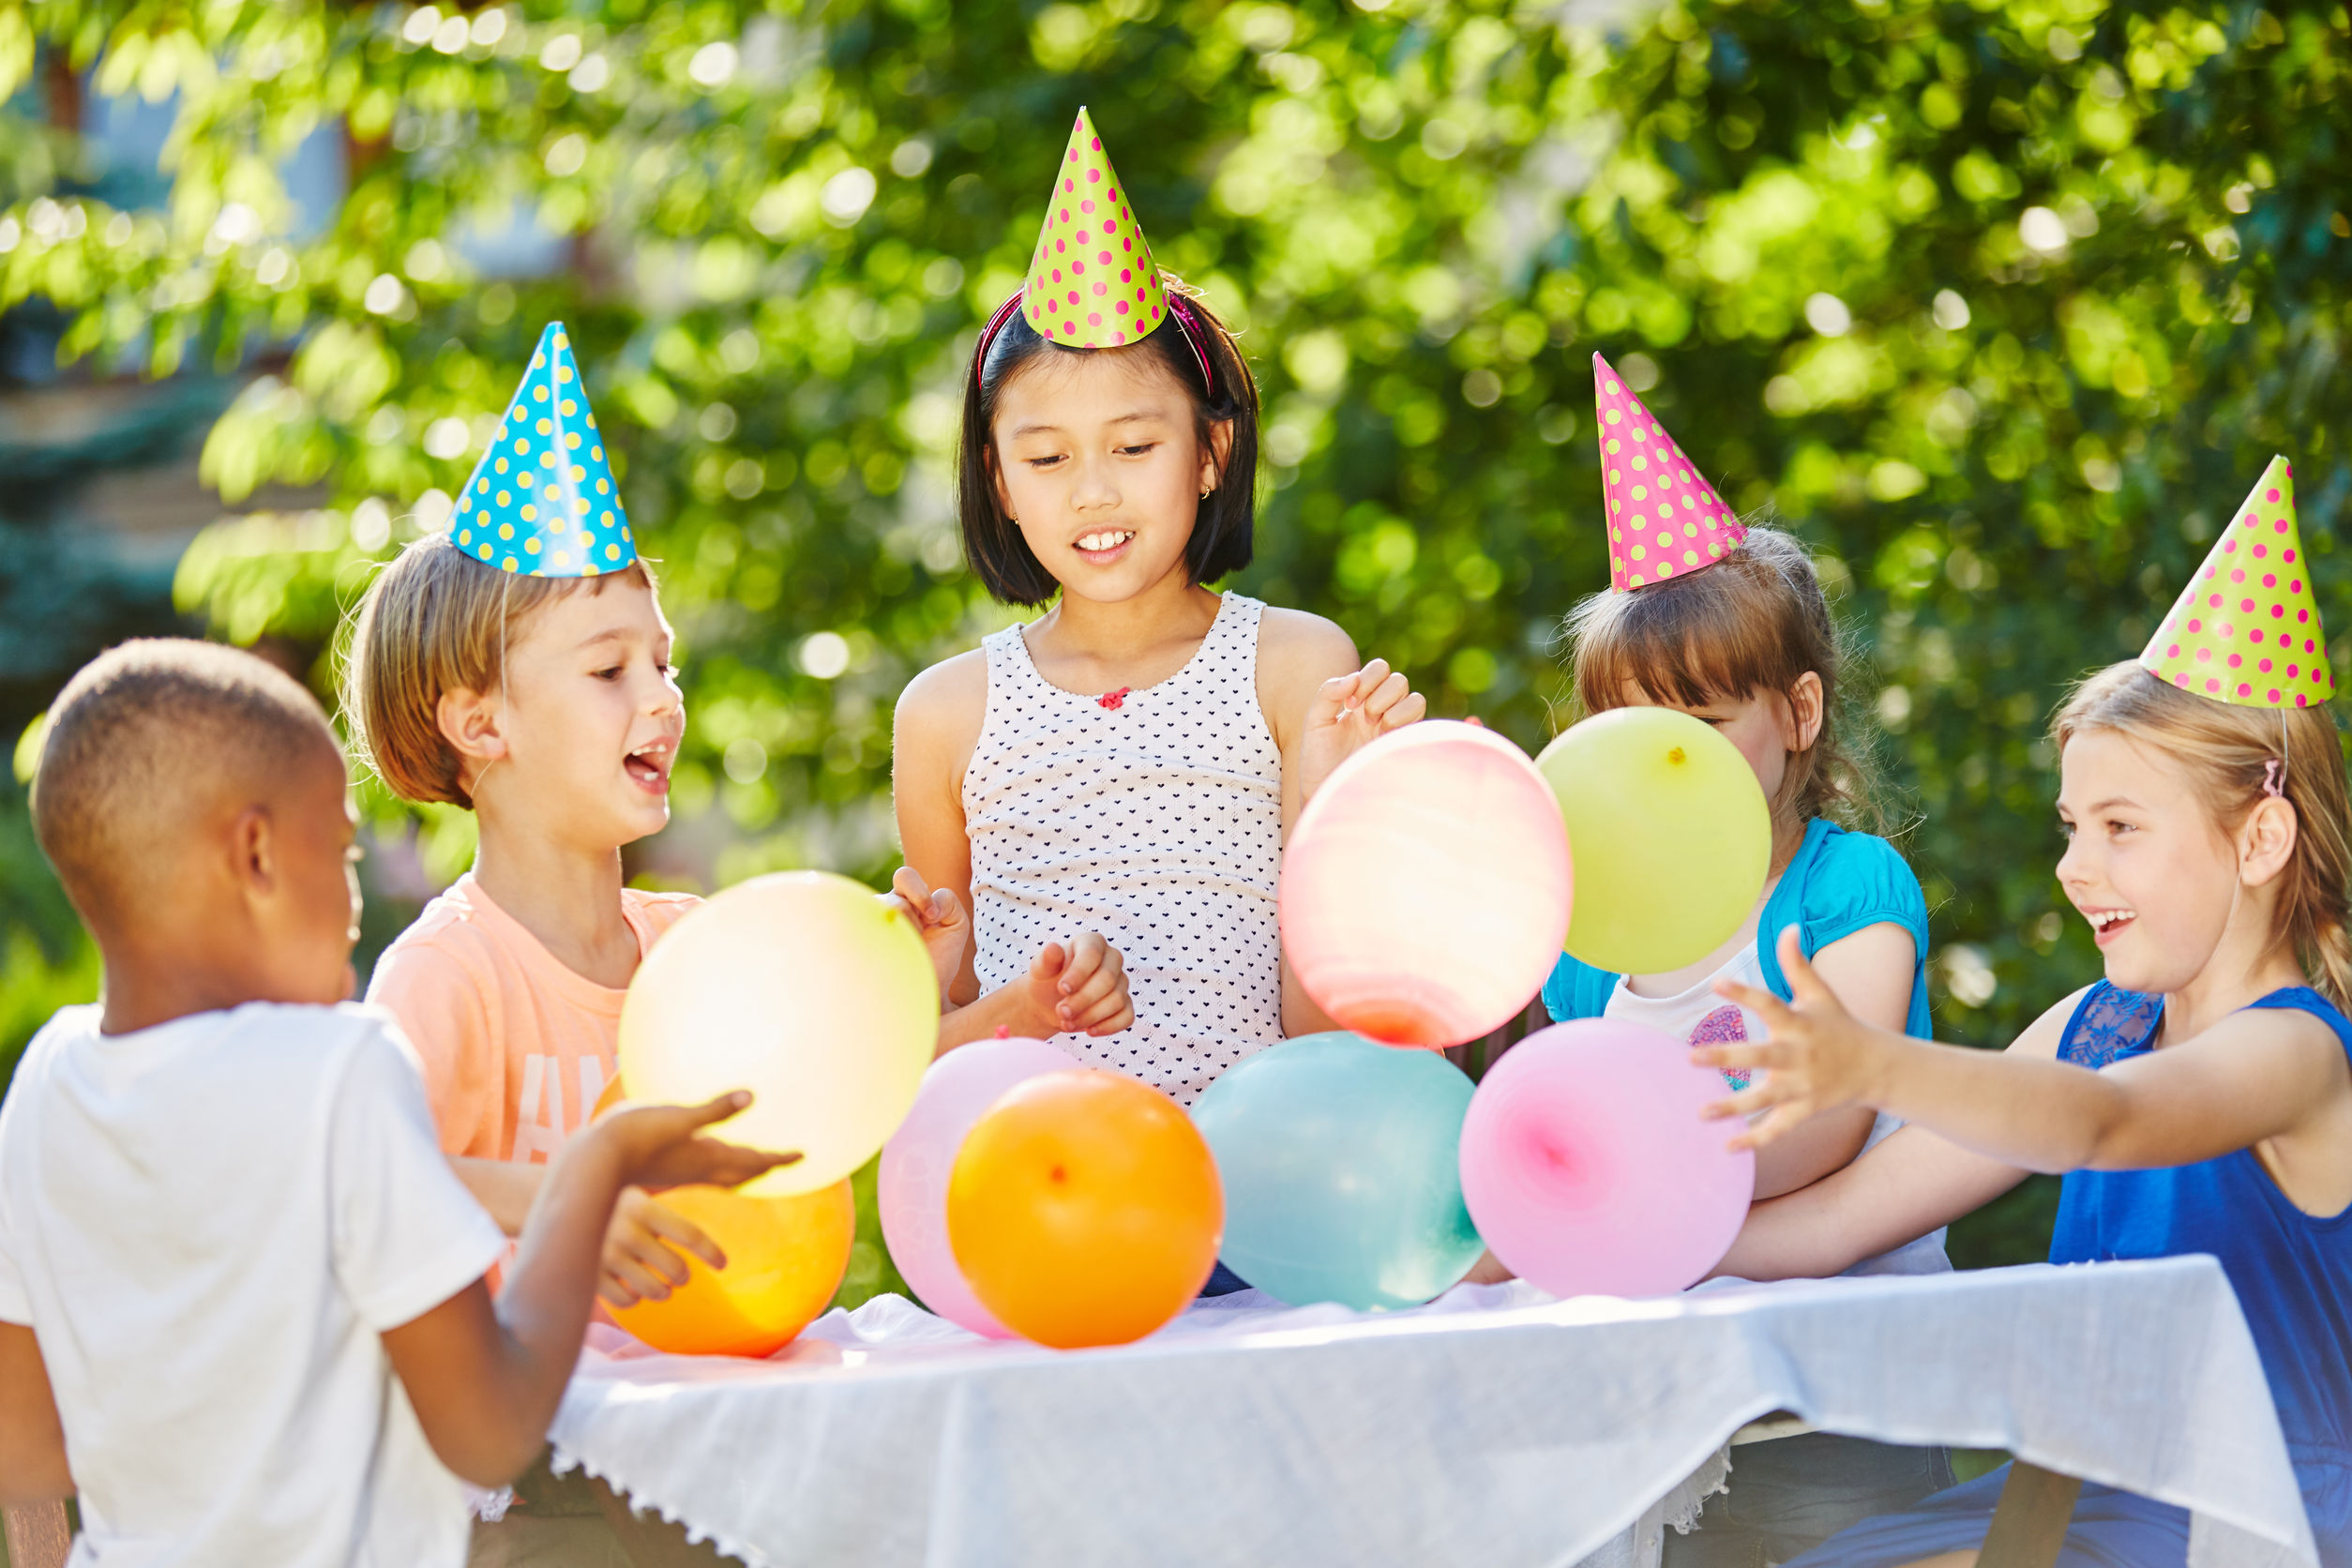 71633955 – many kids celebrate birthday together with balloons and party hats